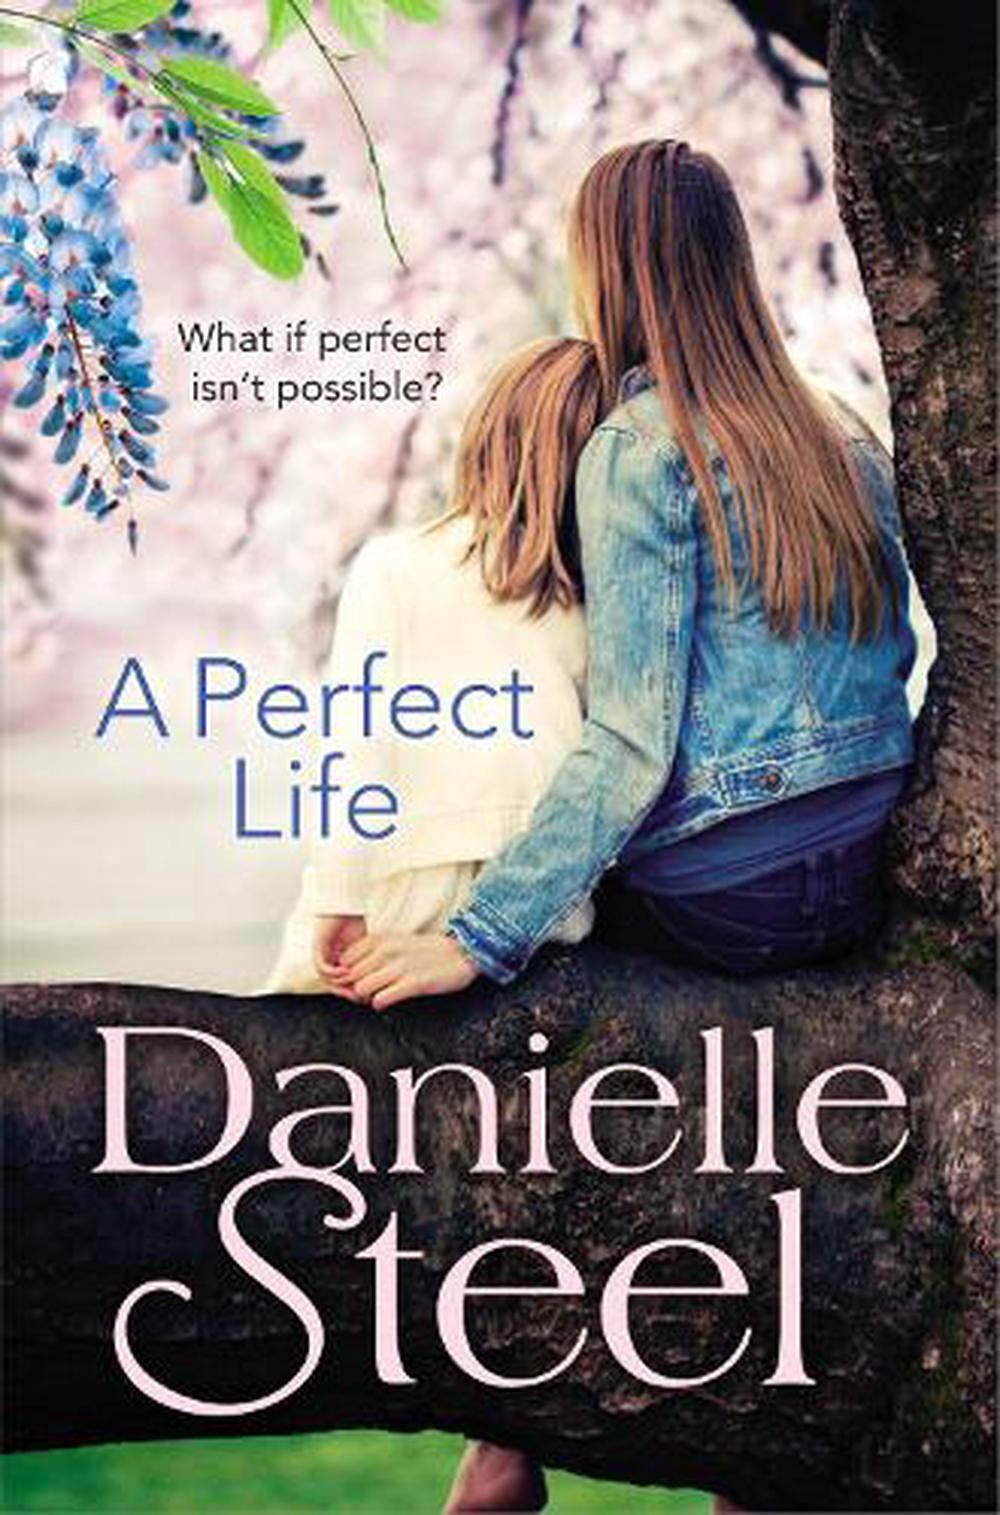 A Perfect Life by Danielle Steel, Paperback, 9780552165884 Buy online